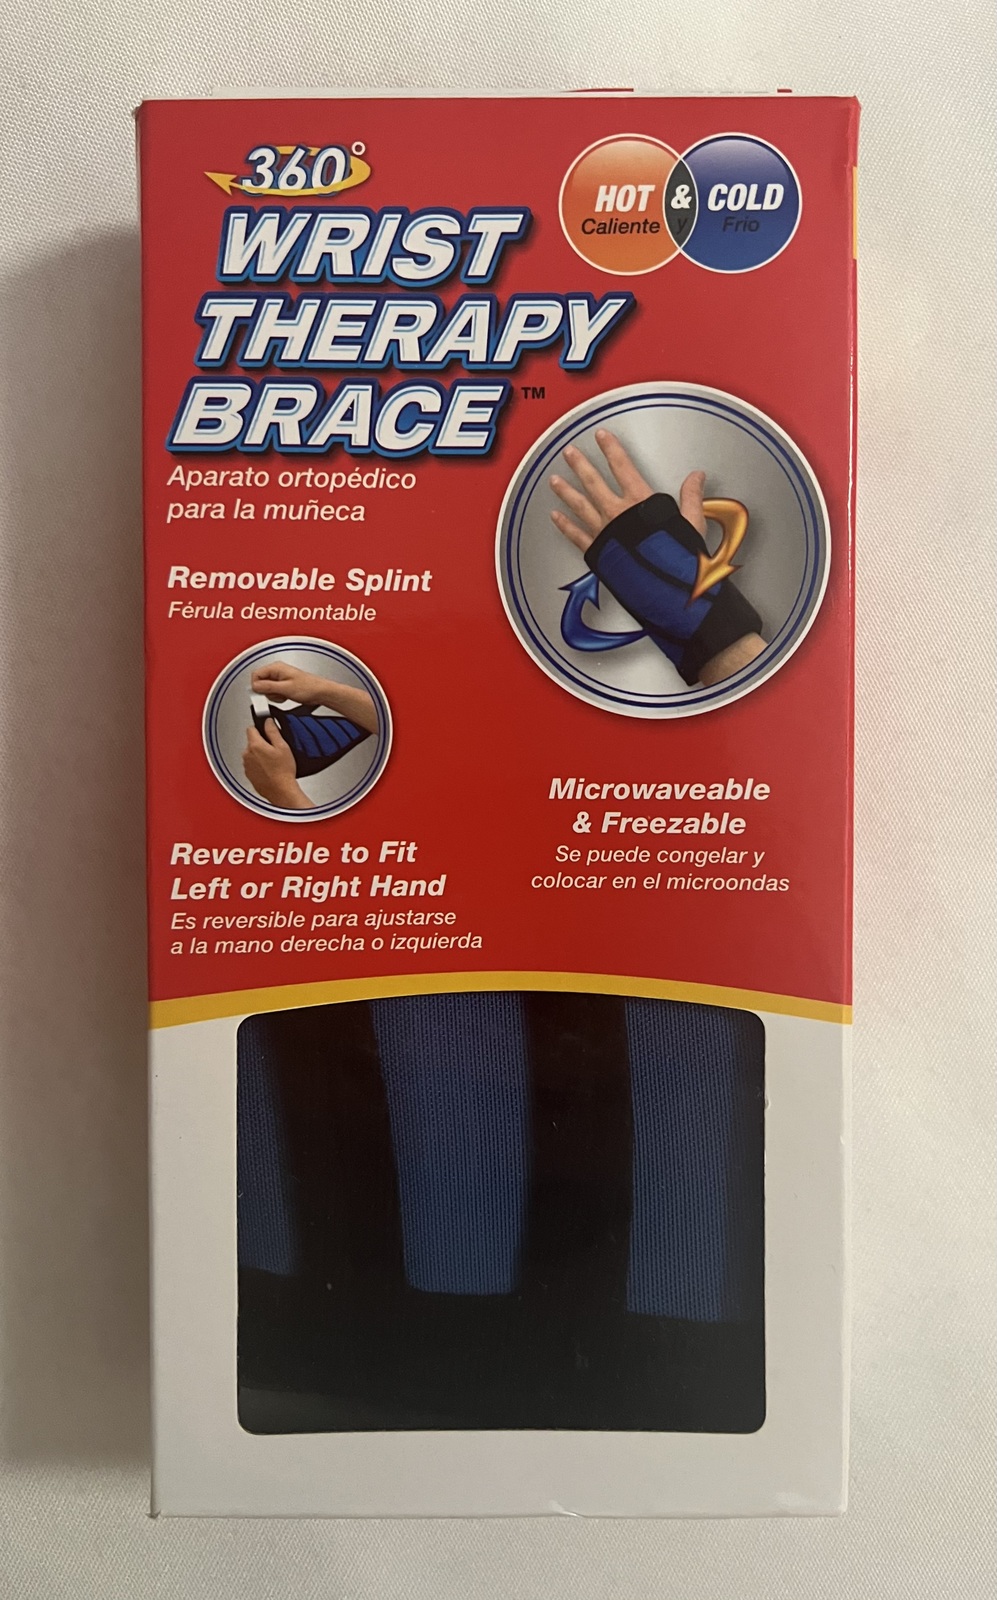 Acu-Life Wrist Therapy Brace Joint Pain Relief and Muscle Recovery Hot 7 Cold - $19.49